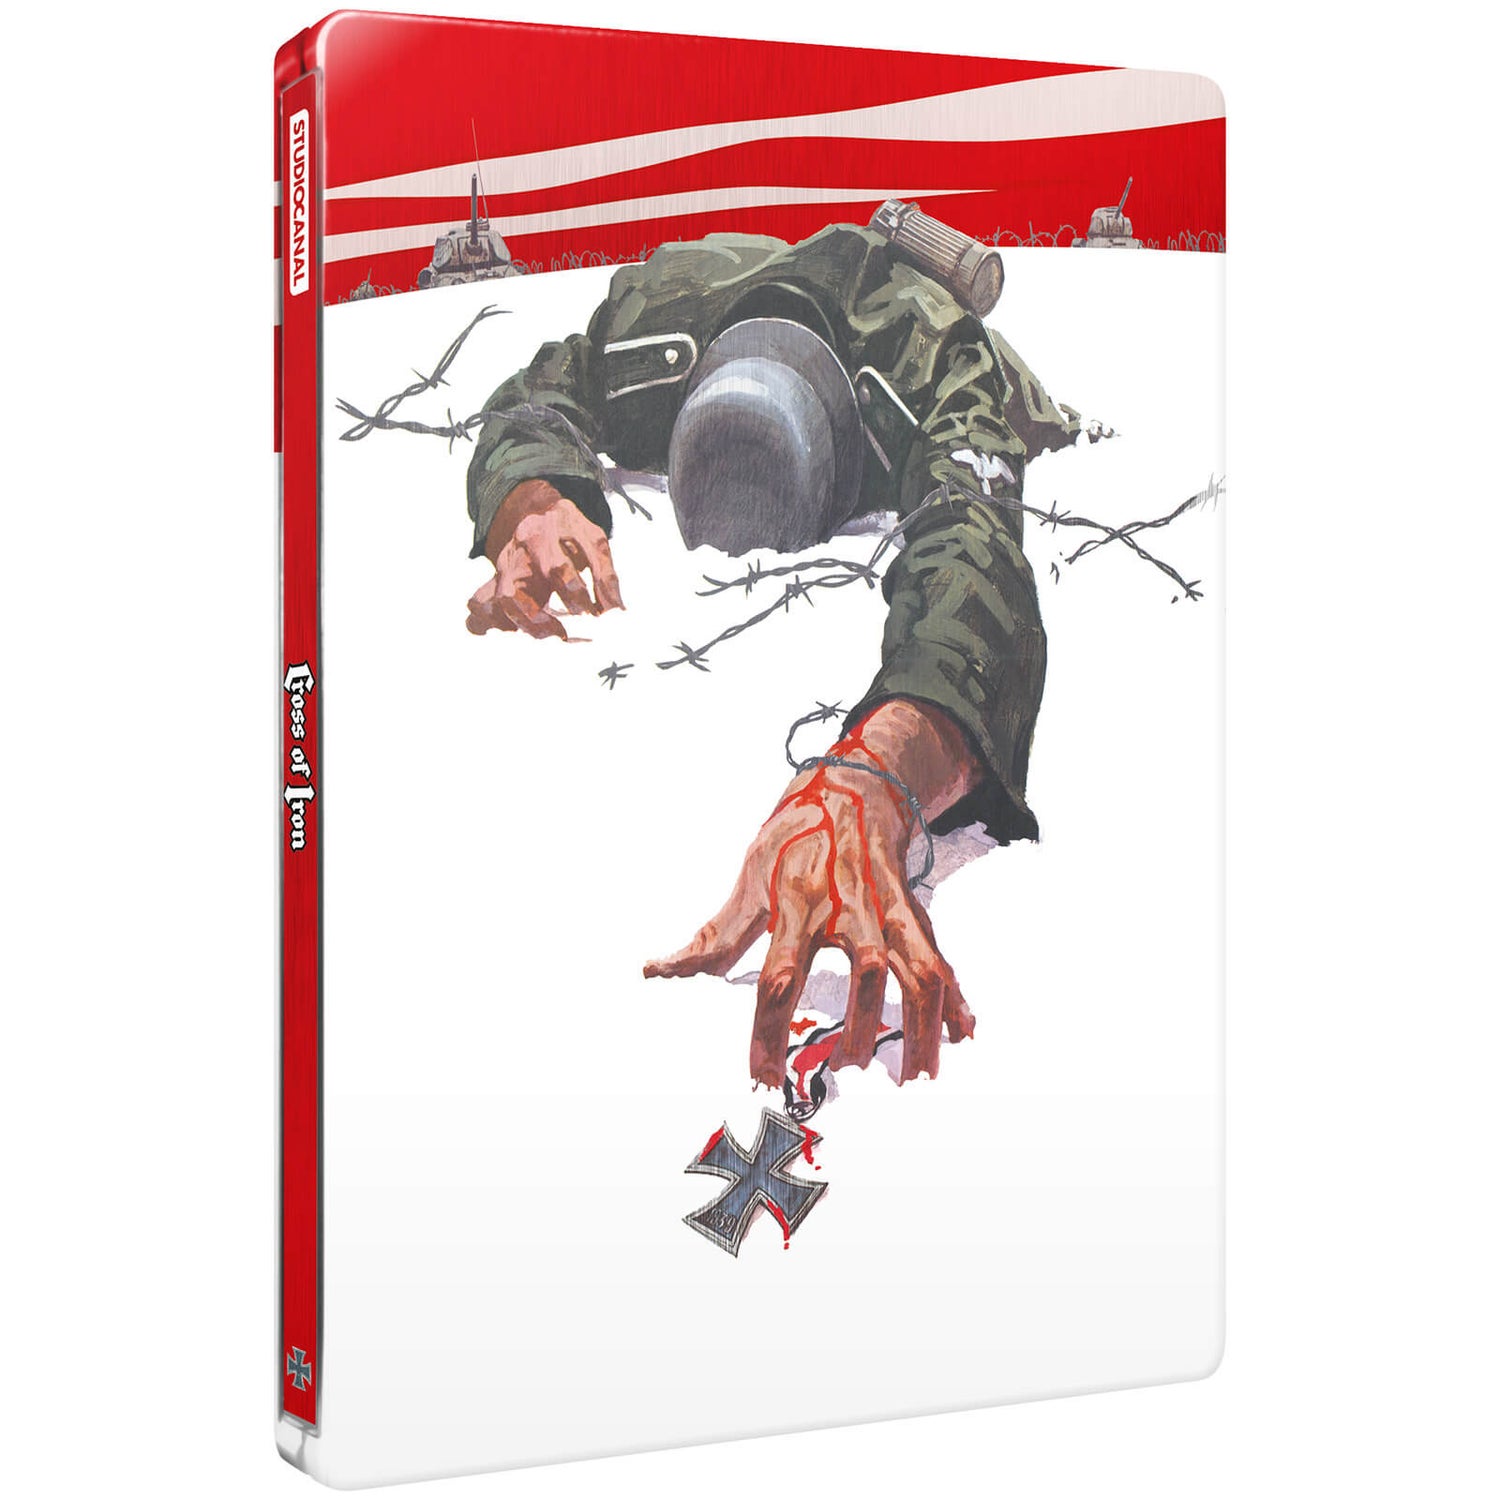 Cross of Iron Vintage Classic Edition 4K Ultra HD Steelbook (includes Blu-ray)